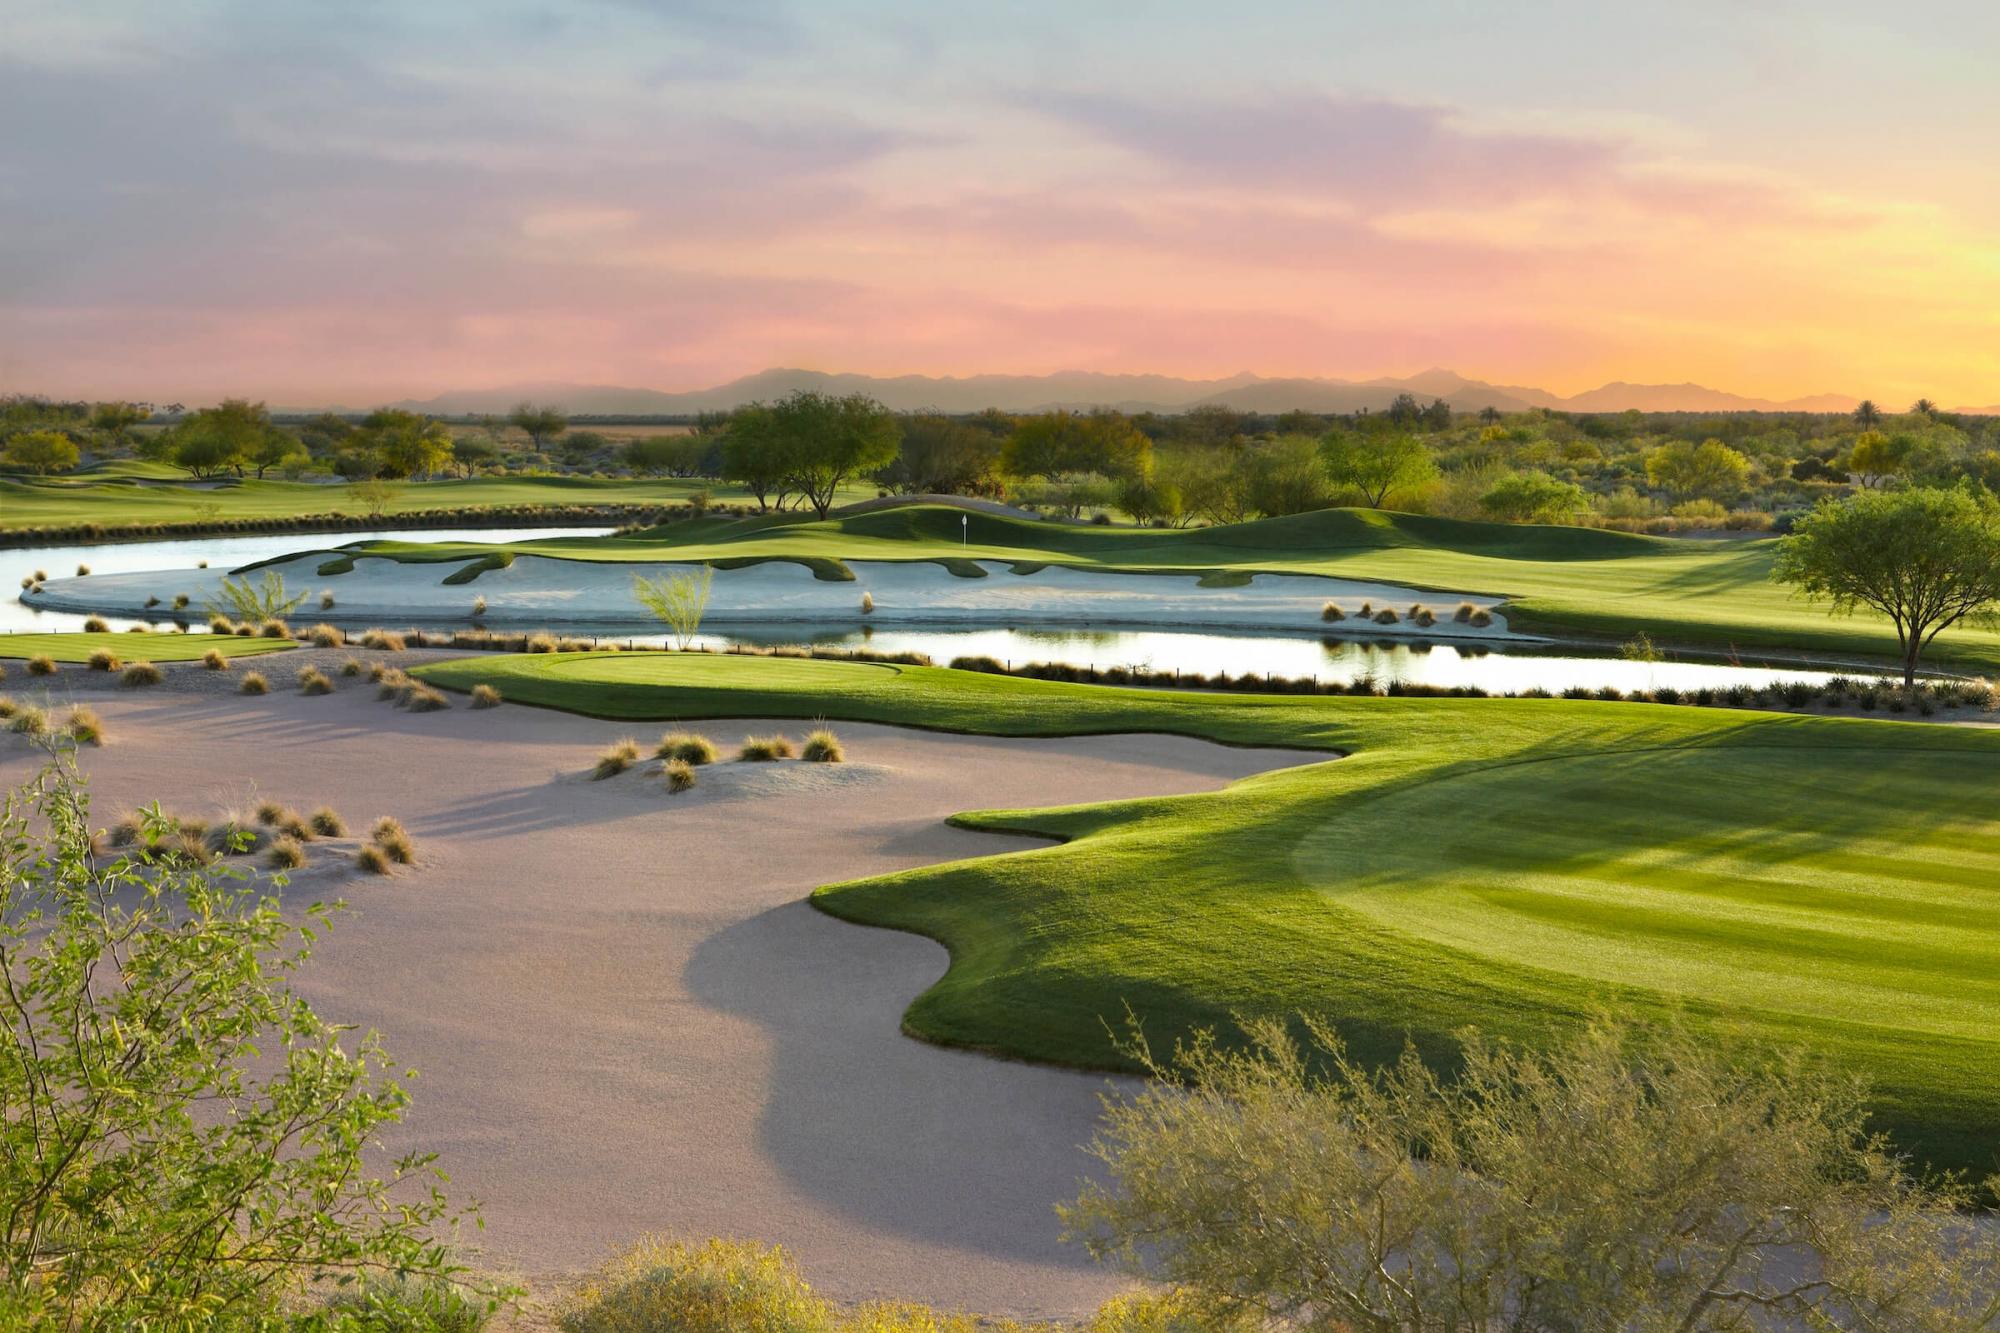 All The Longbow Golf Club's impressive golf course situated in stunning Arizona.